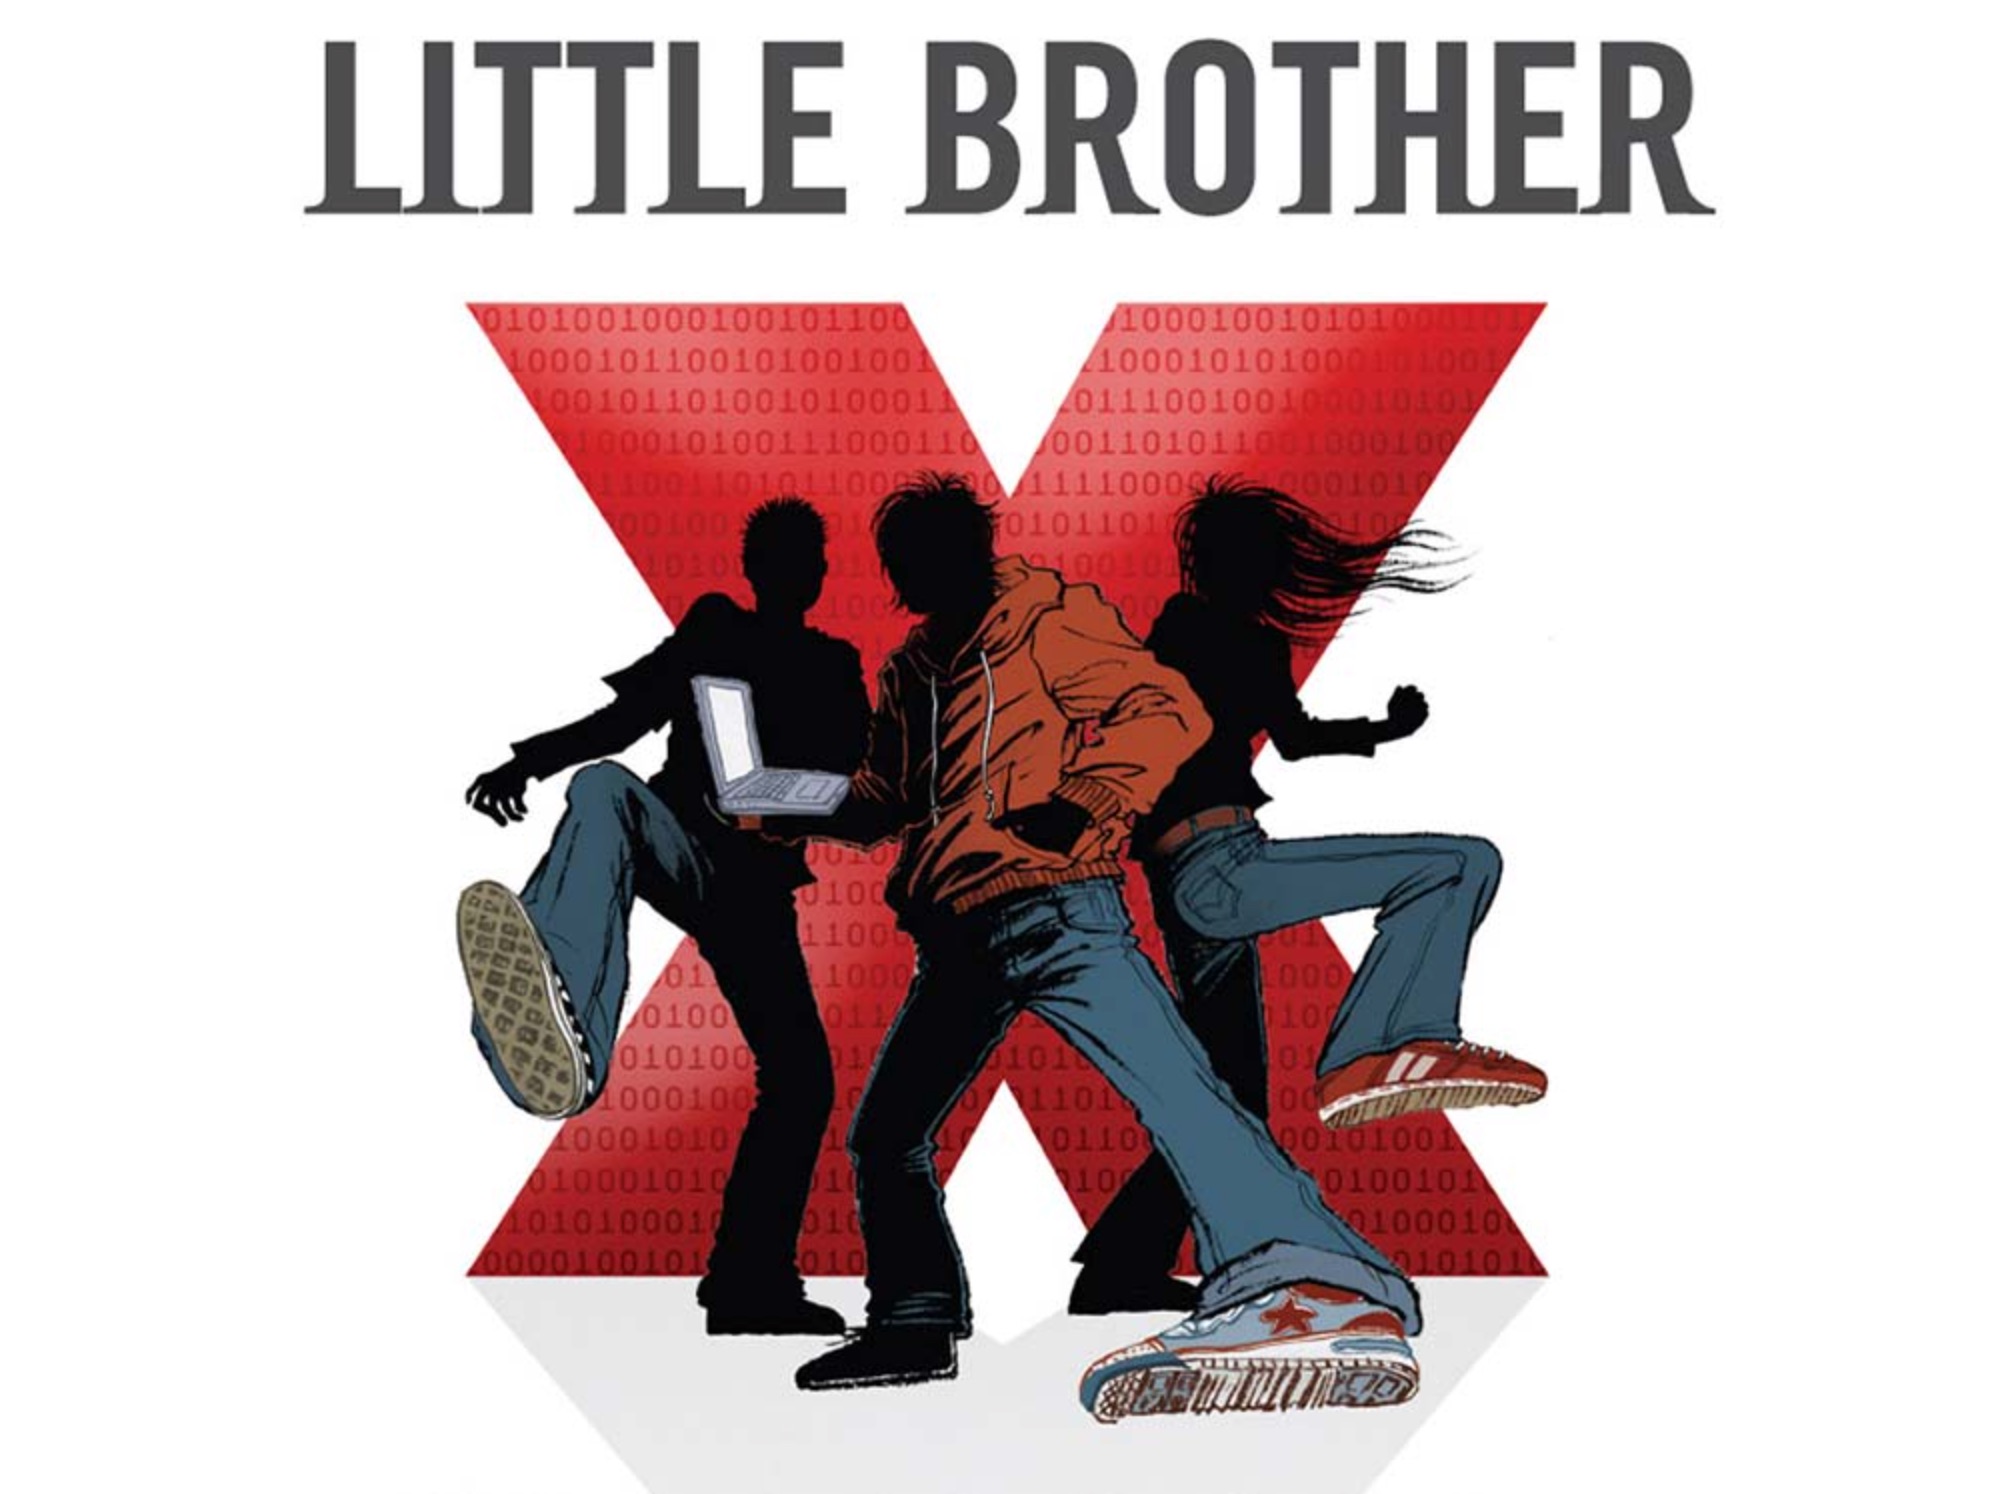 Cover of Little Brother by Cory Doctorow